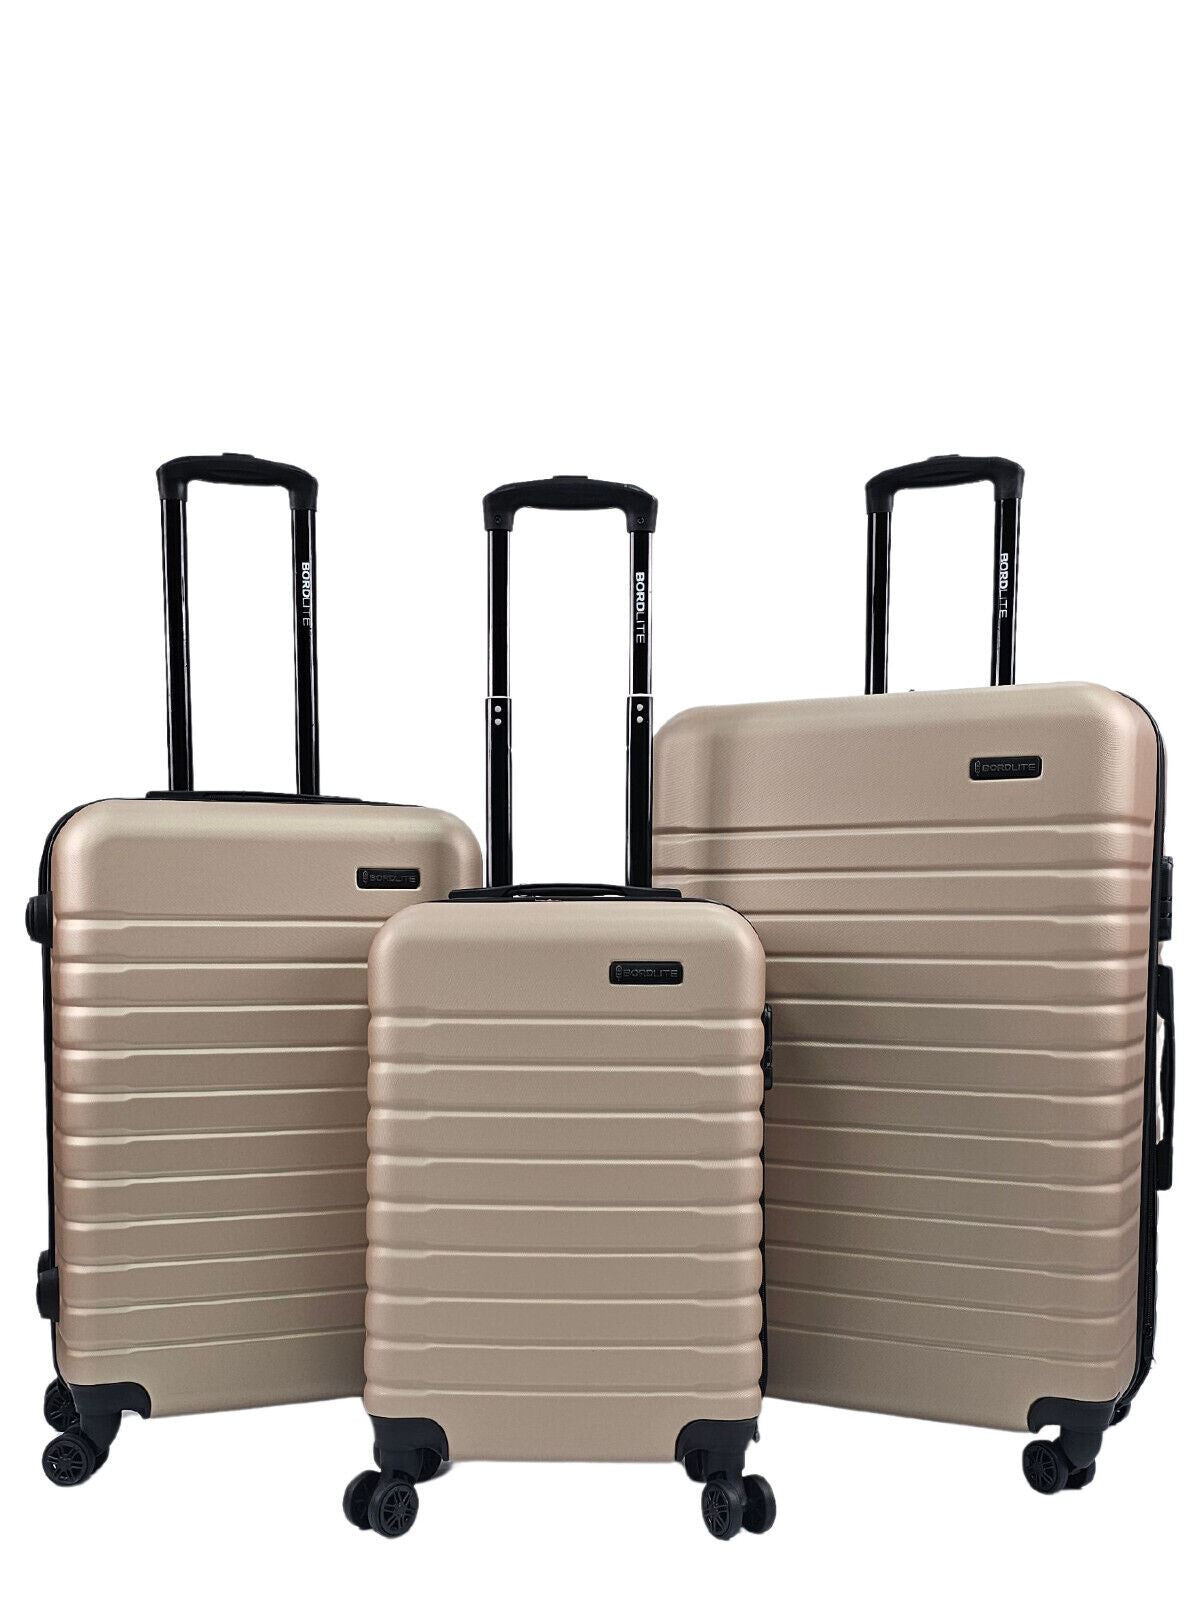 Lightweight Gold Hard Shell ABS Suitcase Set Luggage Travel Trolley Ca ...